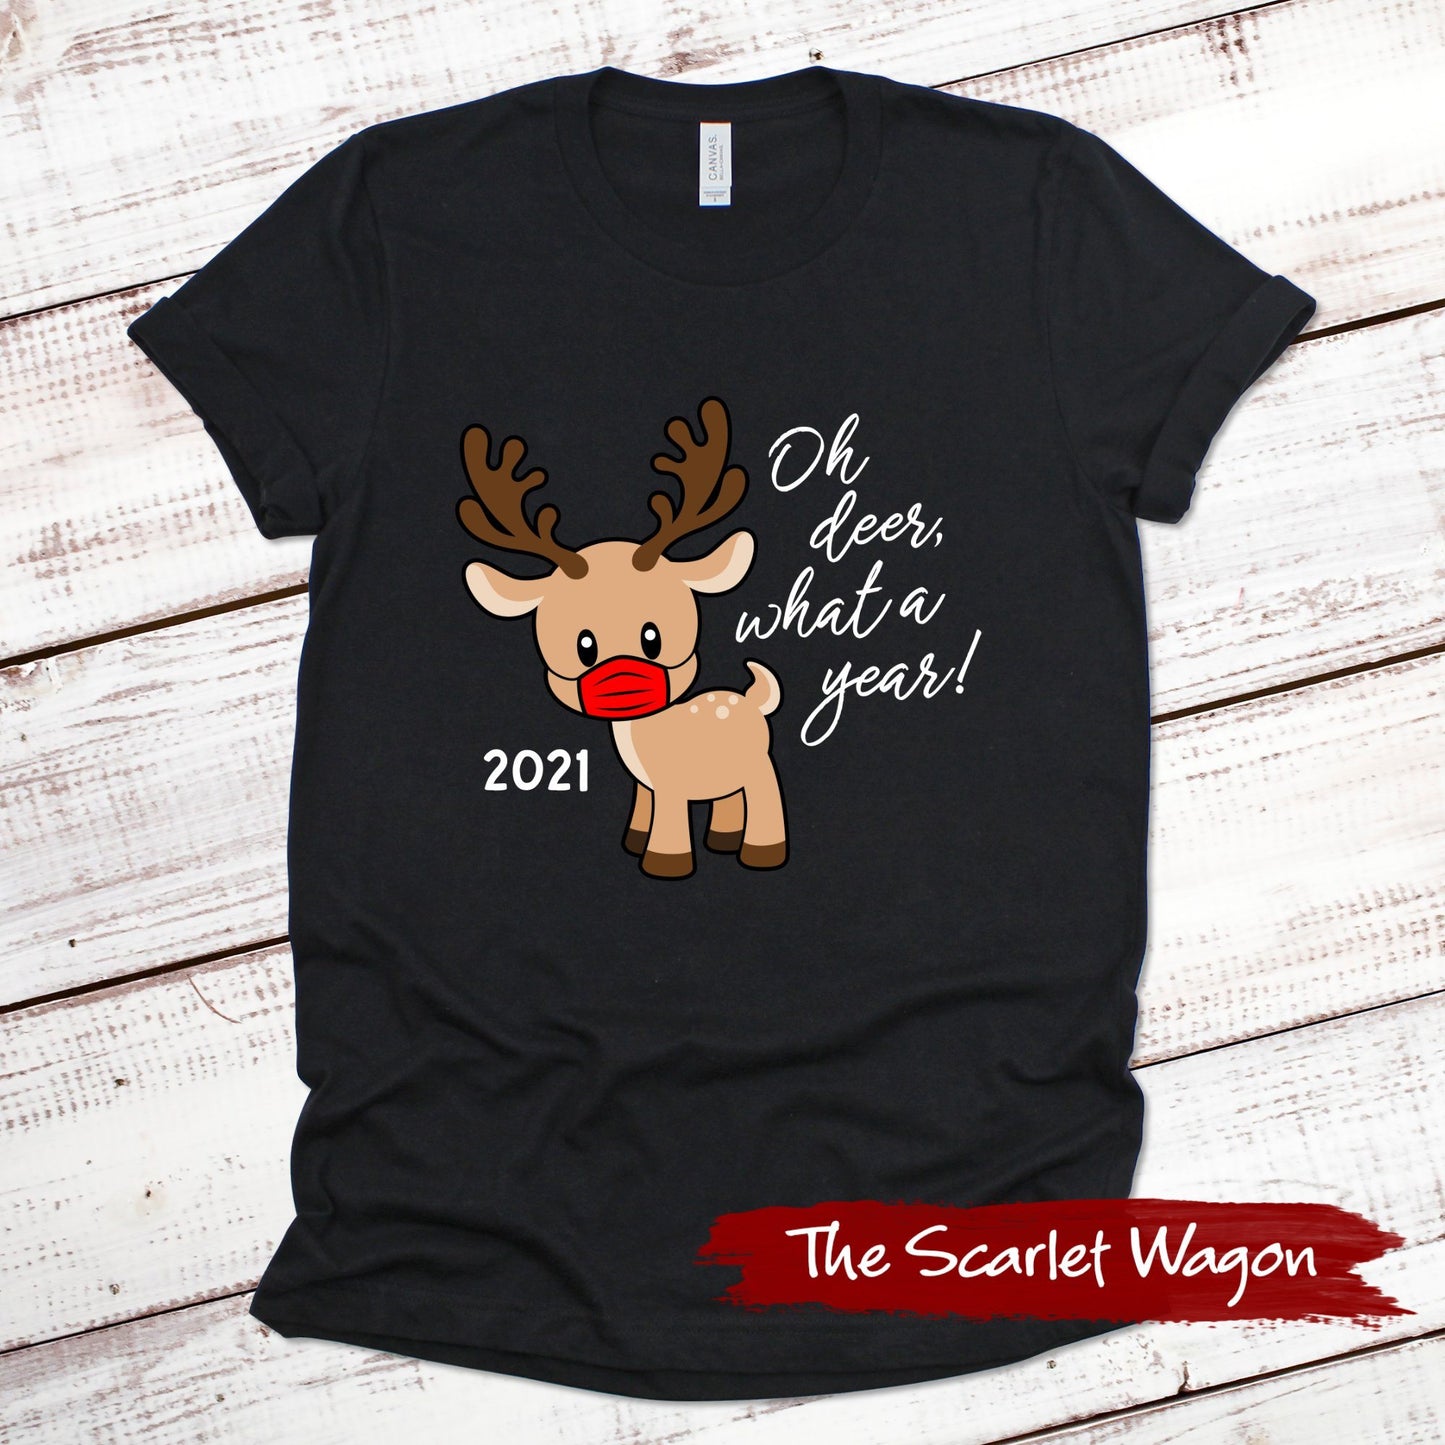 2021 Oh Deer What a Year Christmas Shirt Scarlet Wagon Black XS 